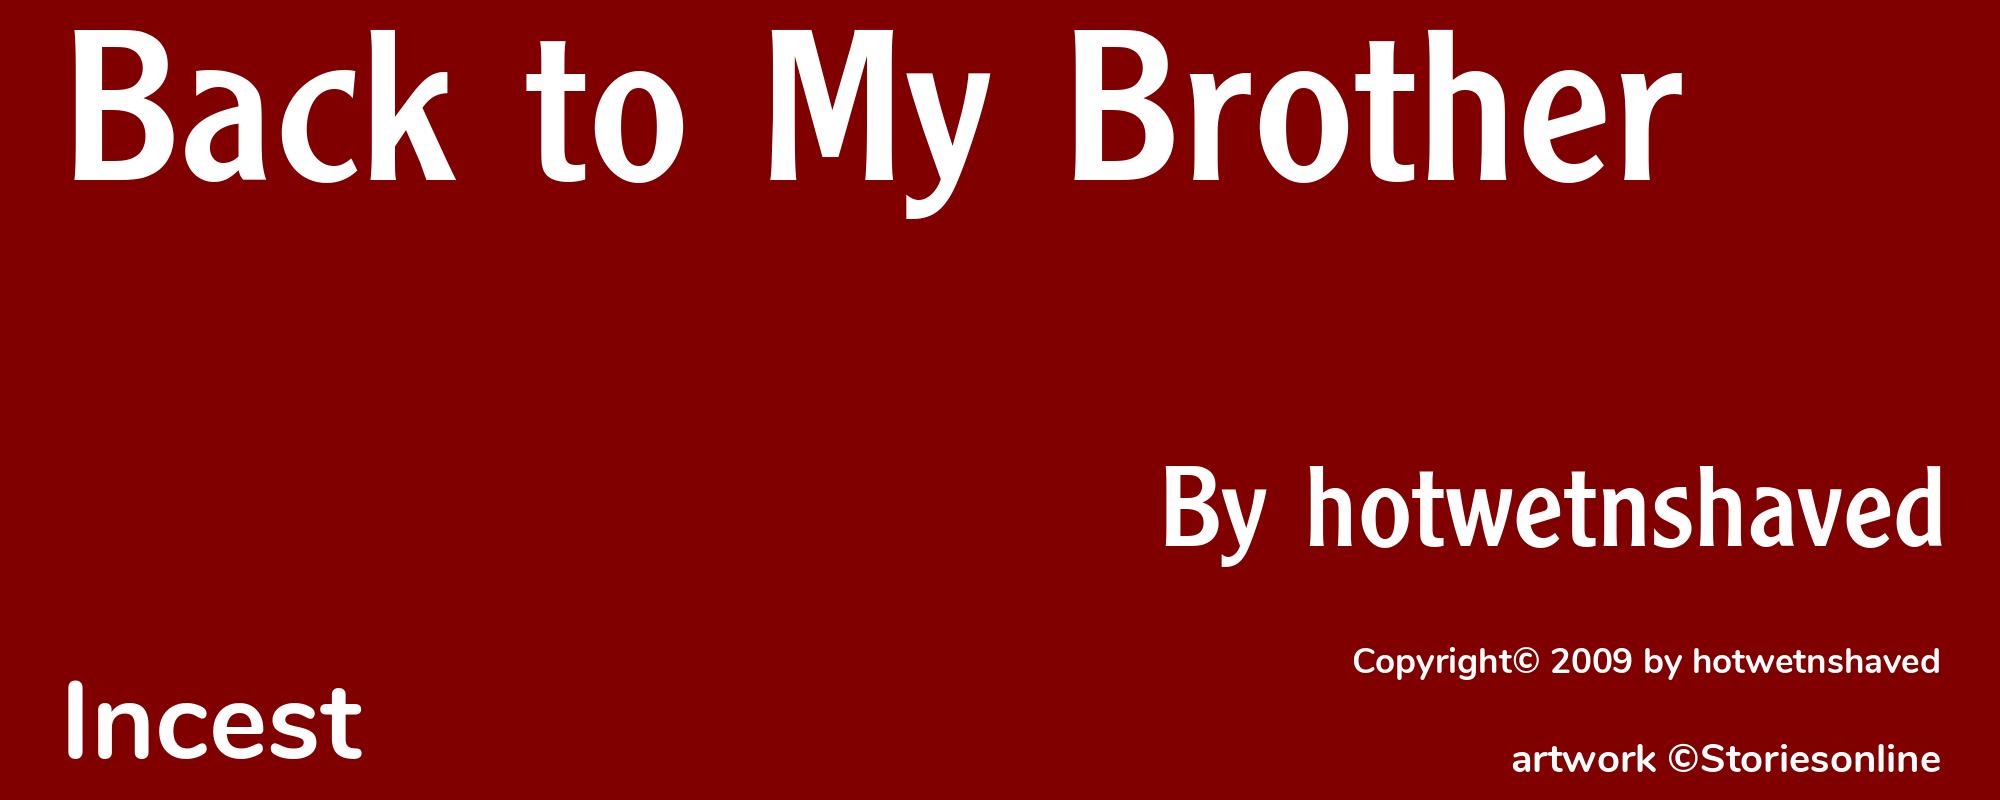 Back to My Brother - Cover